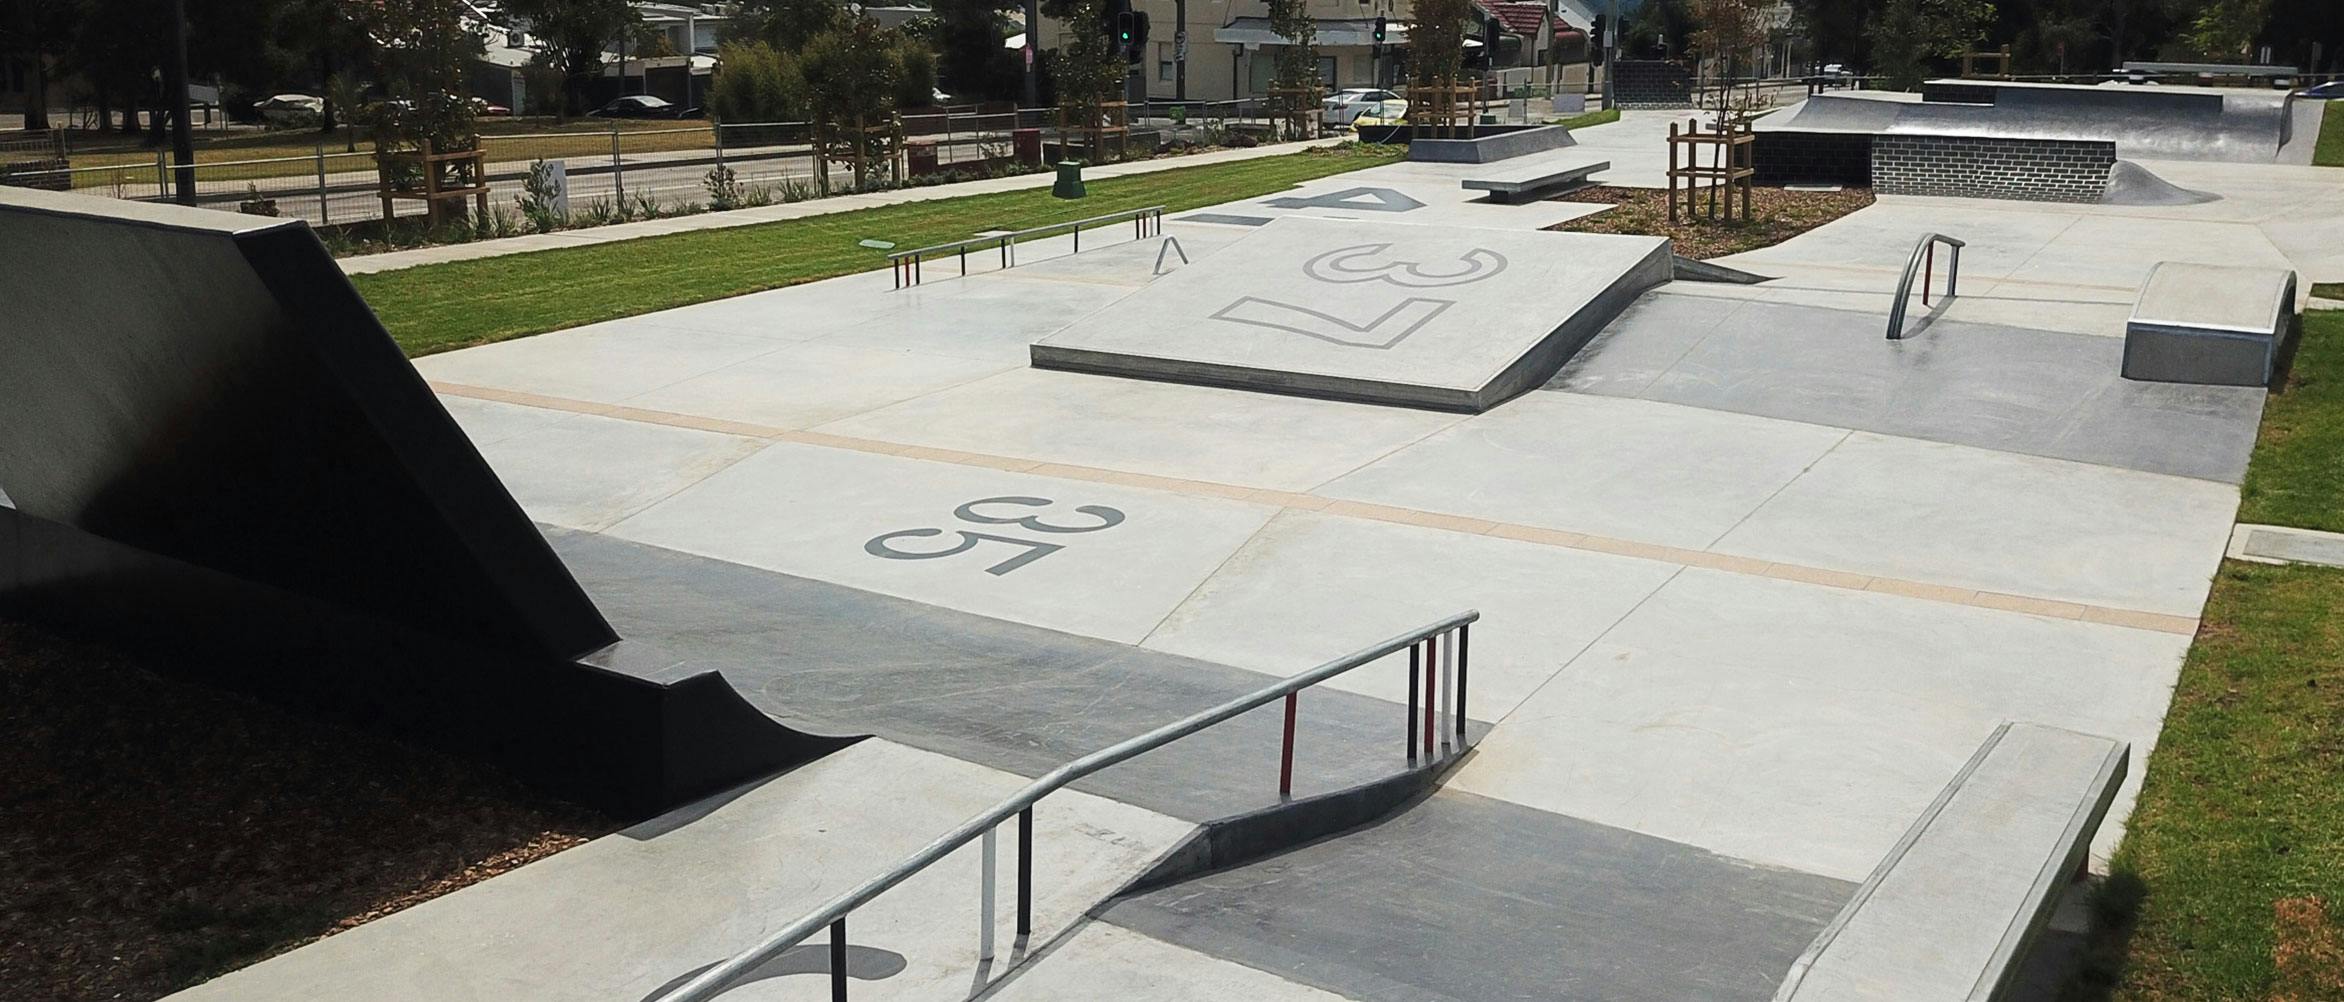 Example of a skate park